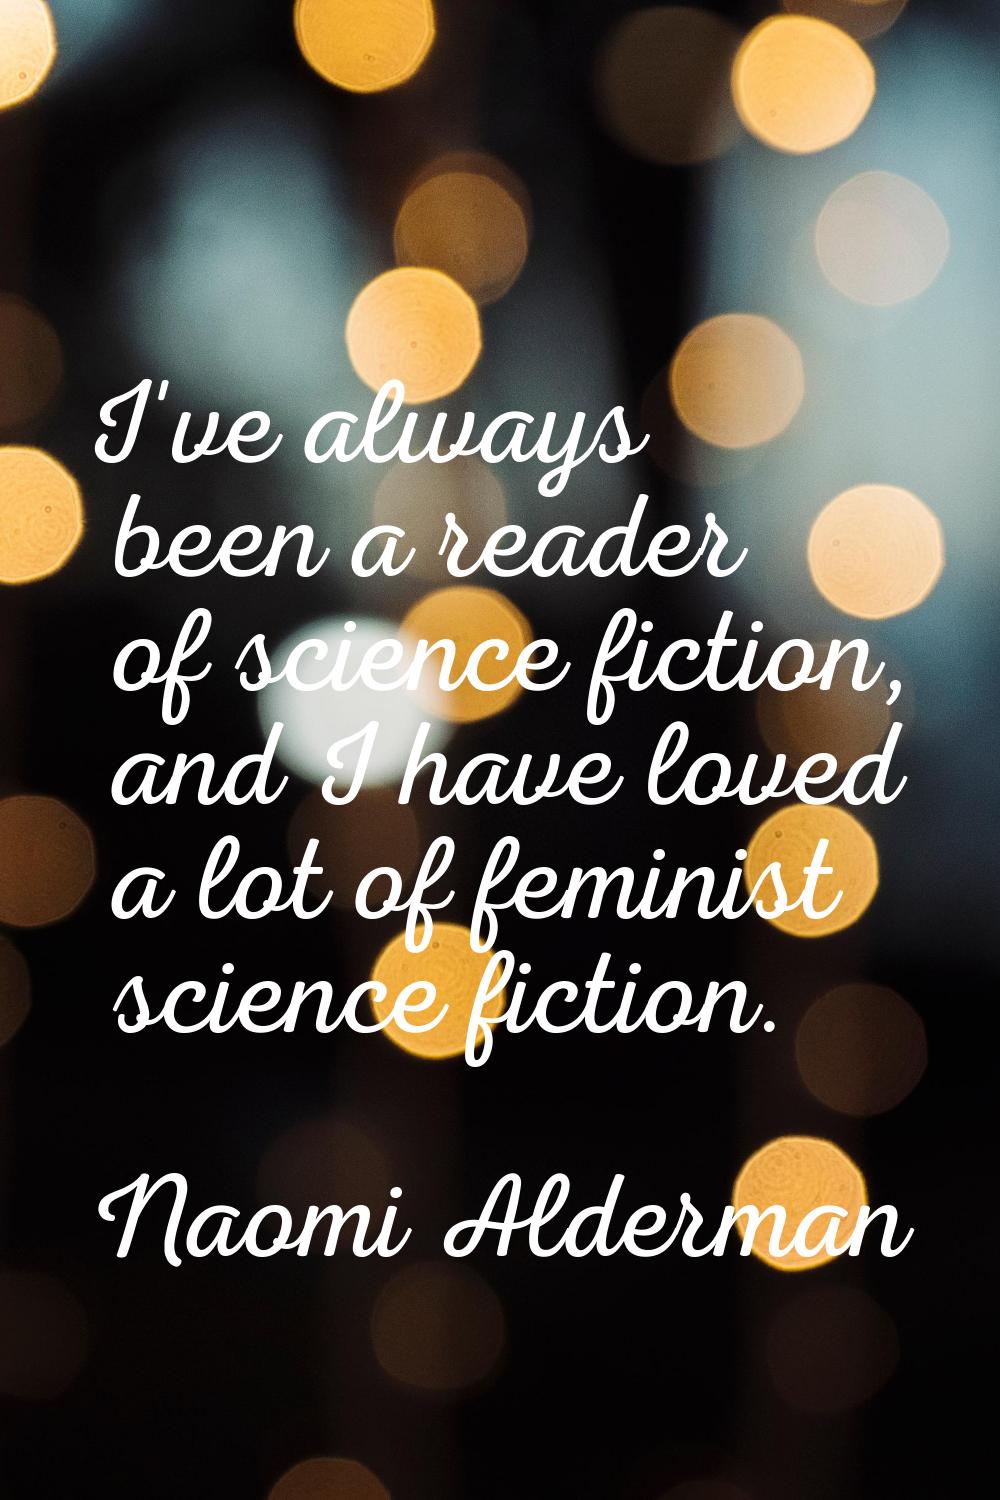 I've always been a reader of science fiction, and I have loved a lot of feminist science fiction.